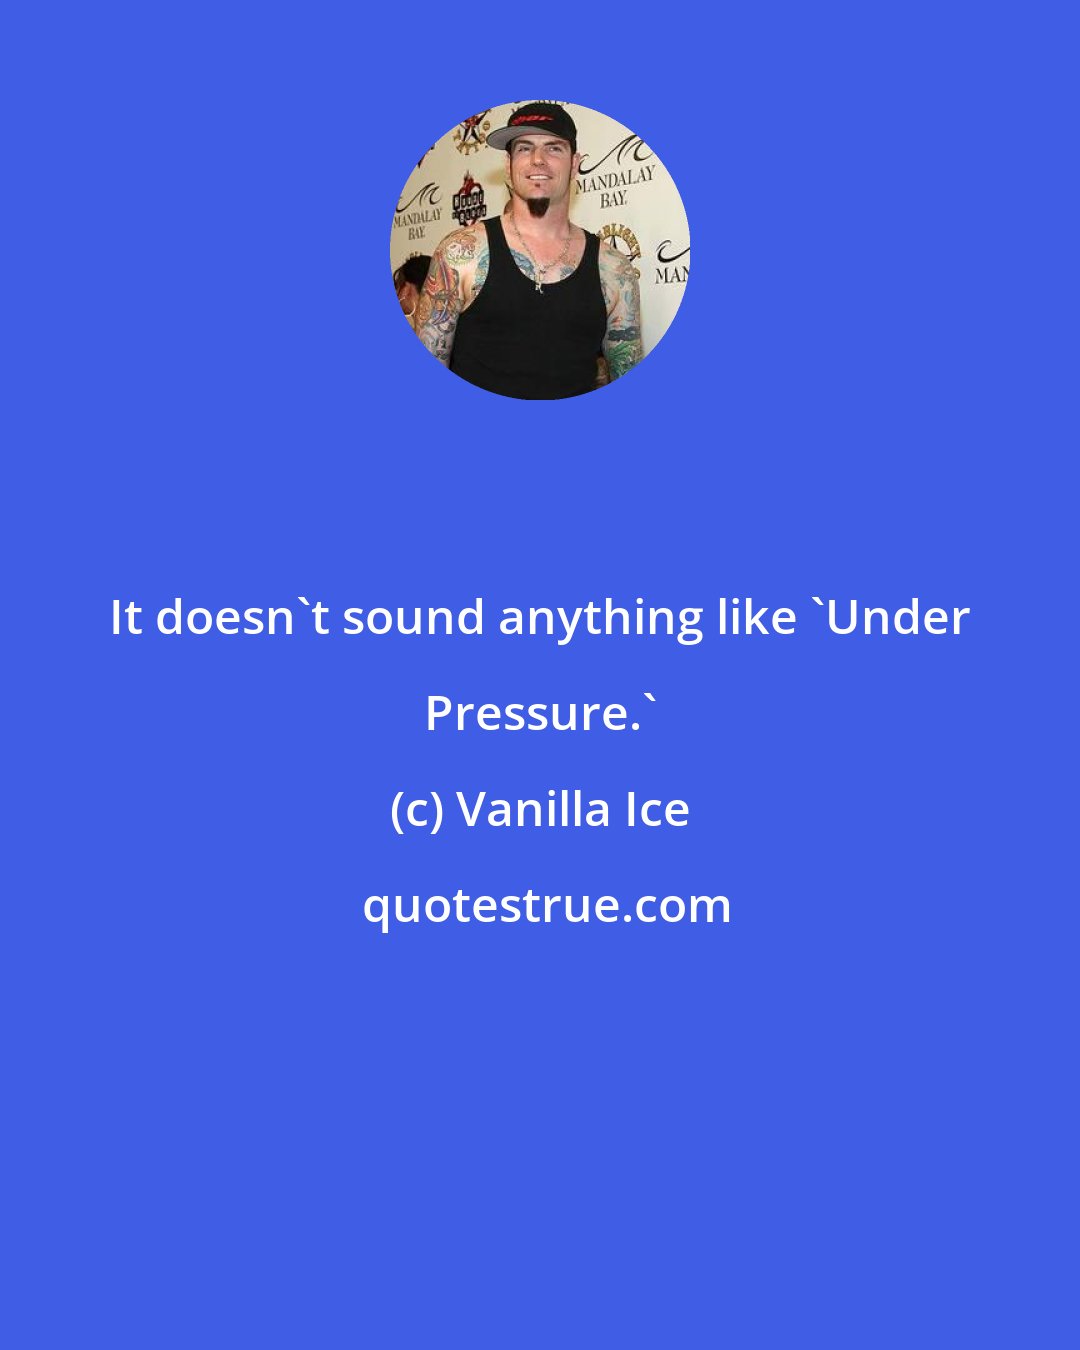 Vanilla Ice: It doesn't sound anything like 'Under Pressure.'